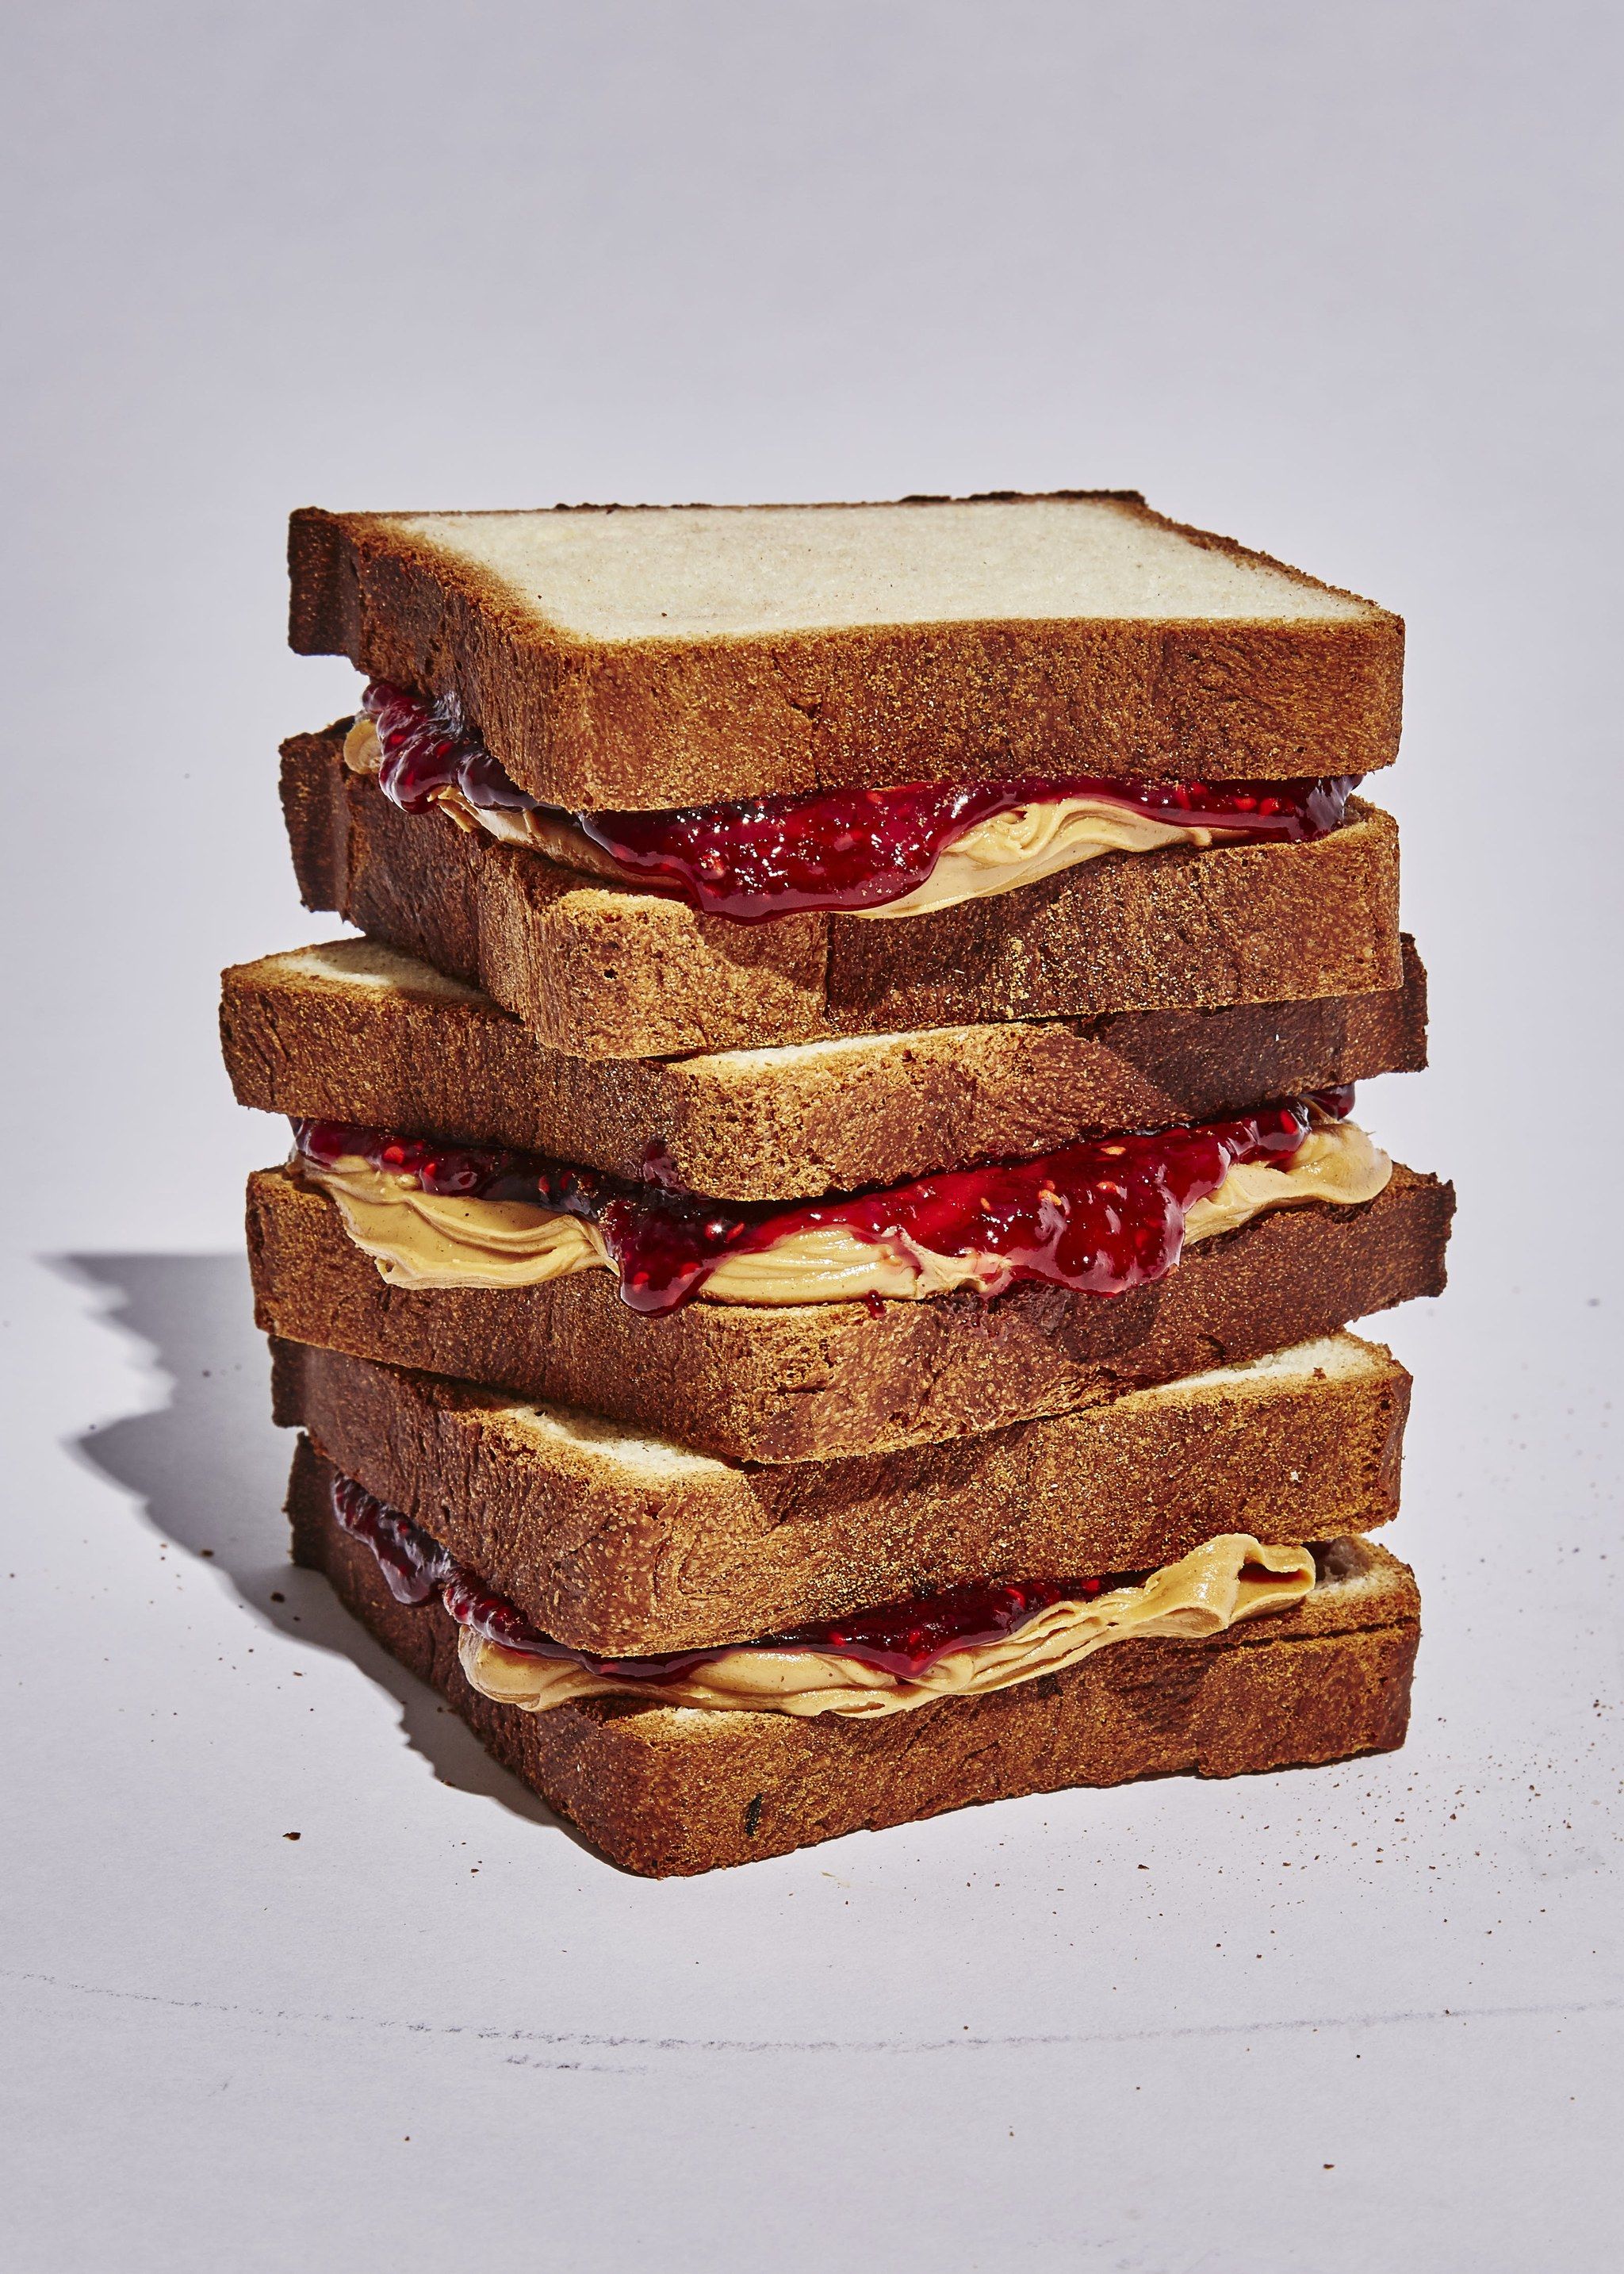 Hot Takes About the Right Way to Make a PB&J. Peanut butter jelly sandwich, Tea sandwiches recipes, Peanut butter sandwich